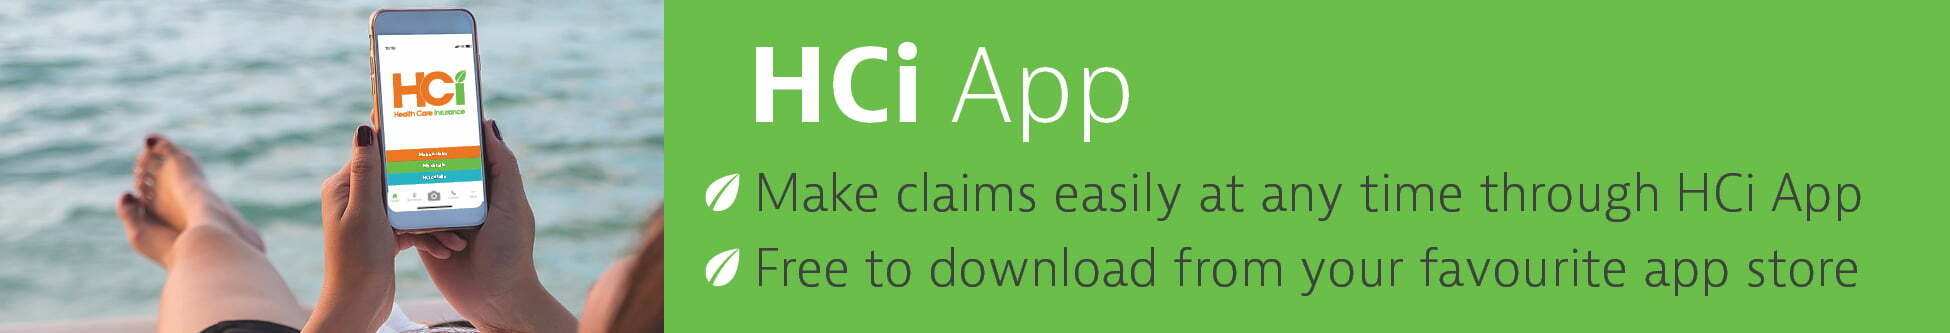 Make claims easily at any time through HCi app - free to download